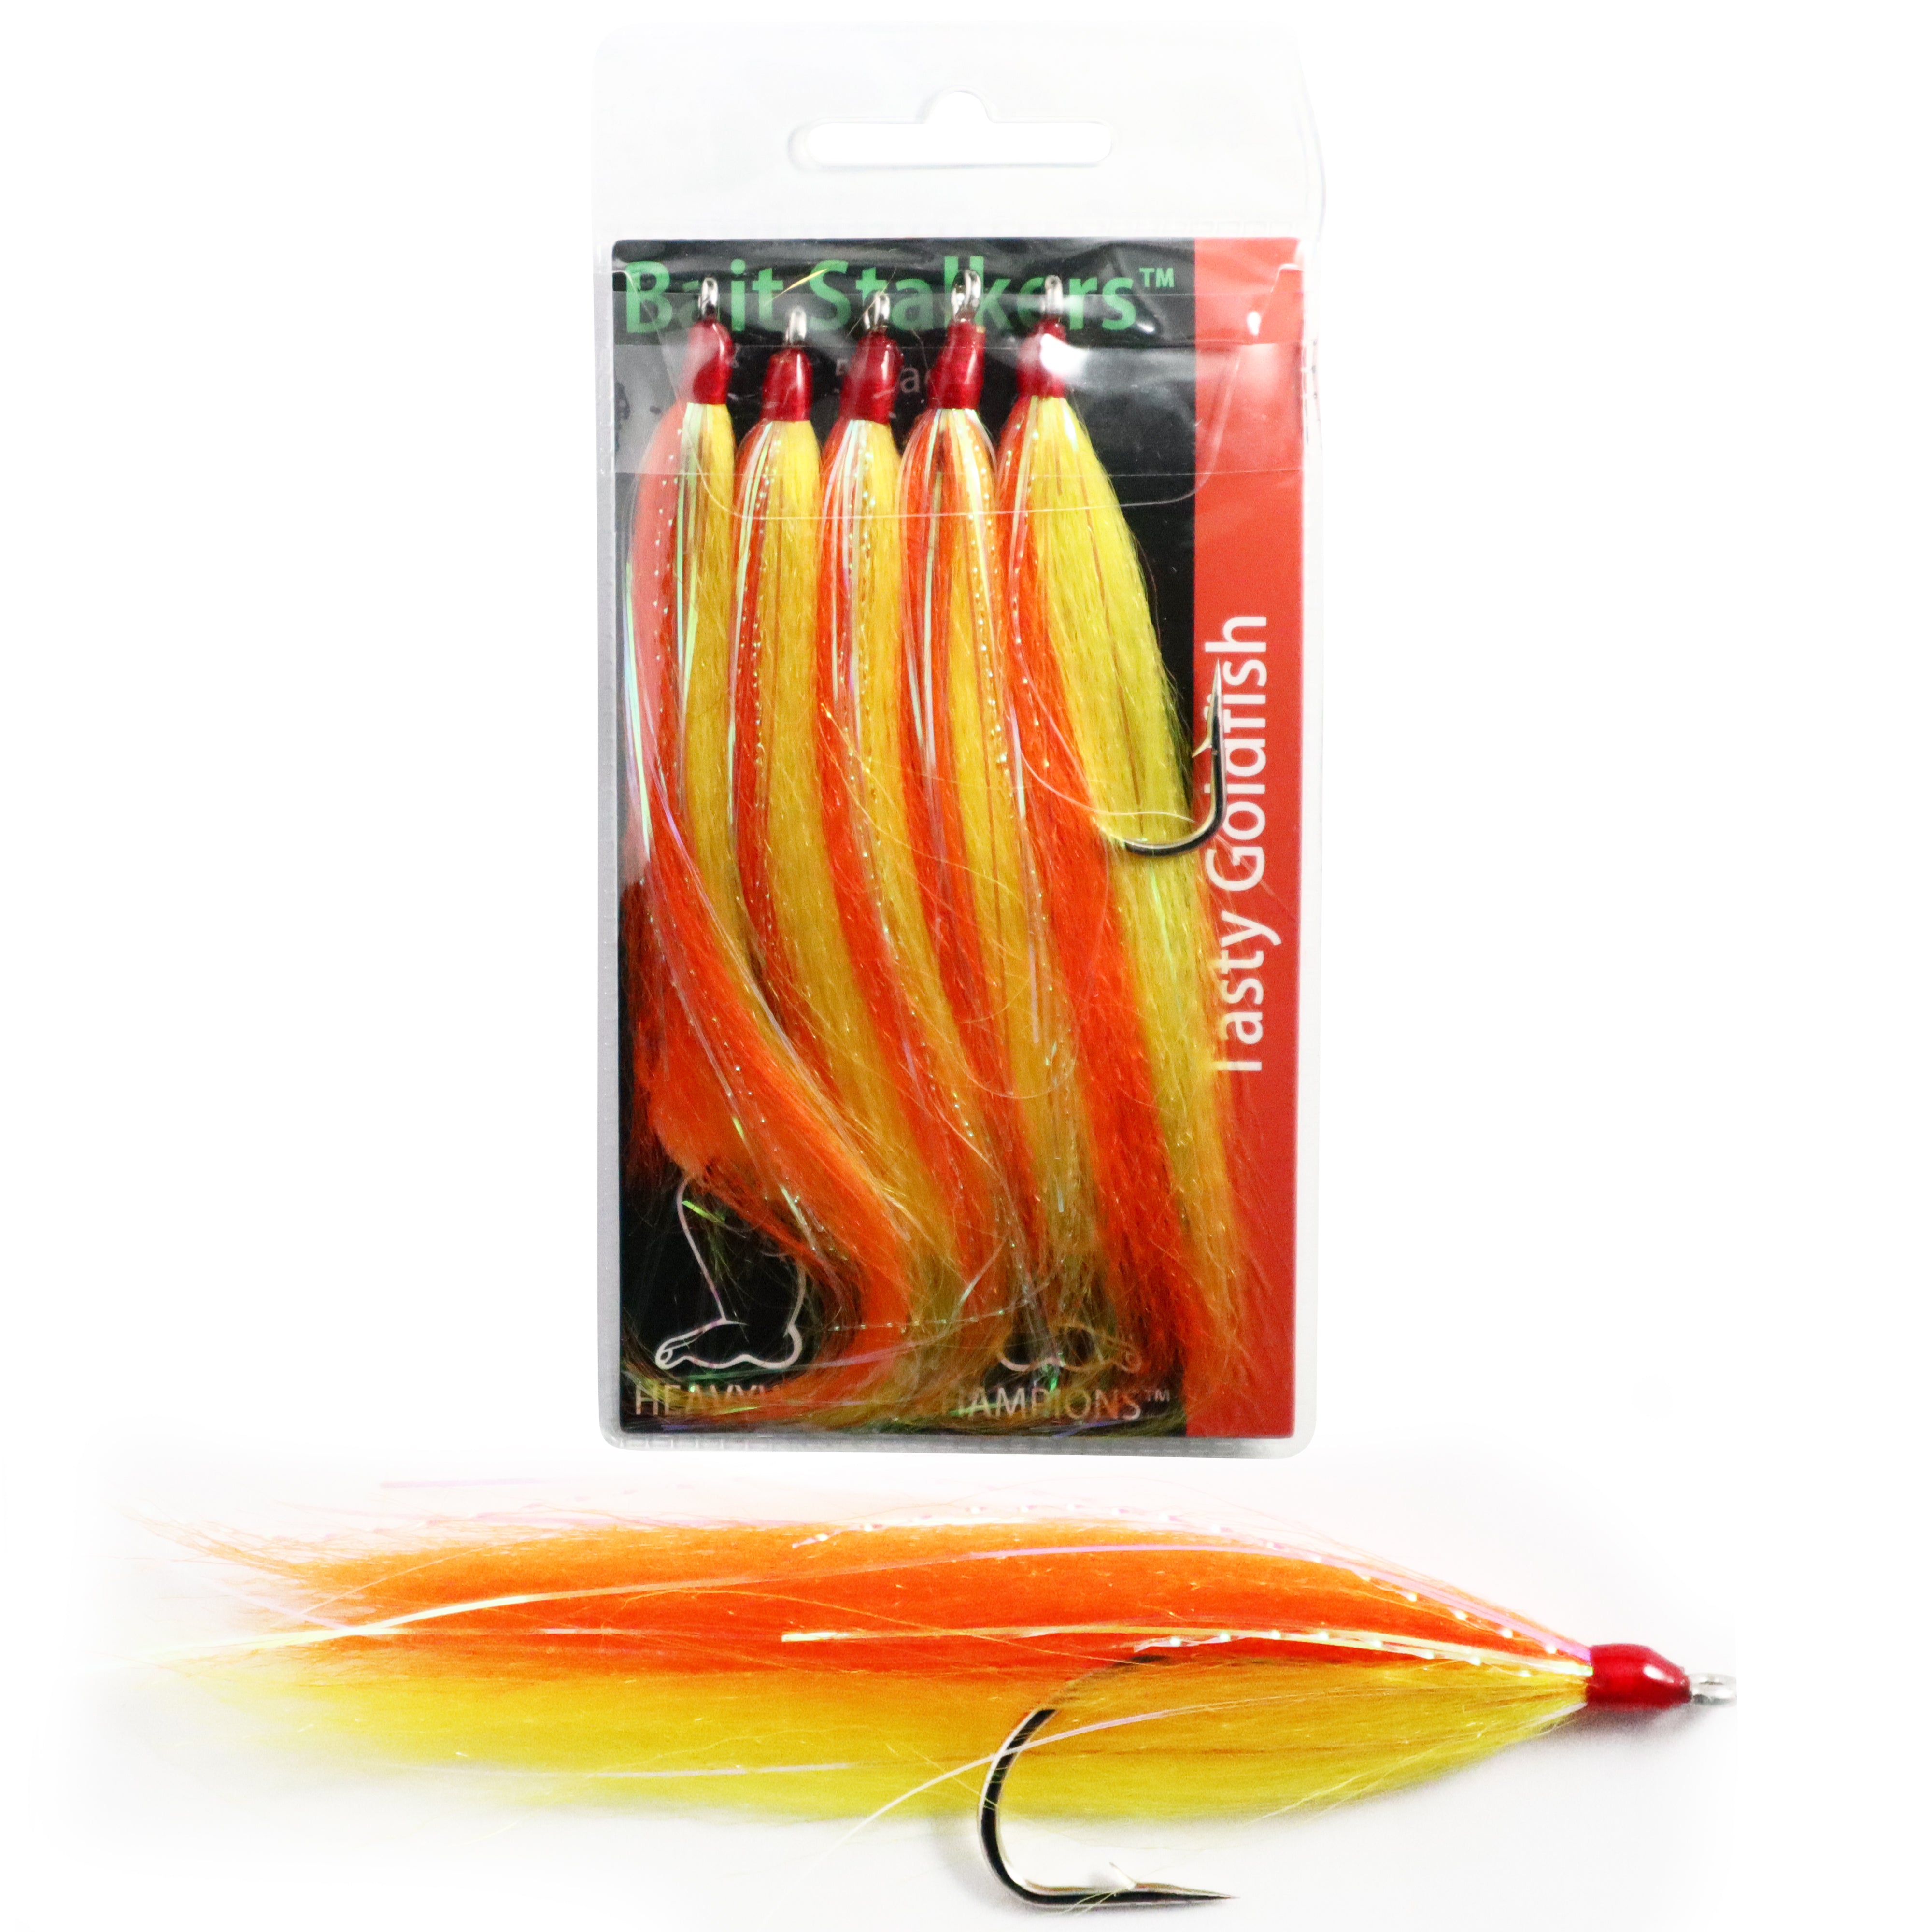 Bait Stalkers: Stinger Flies to Catch Extra Catfish, 5-Pack, Gold